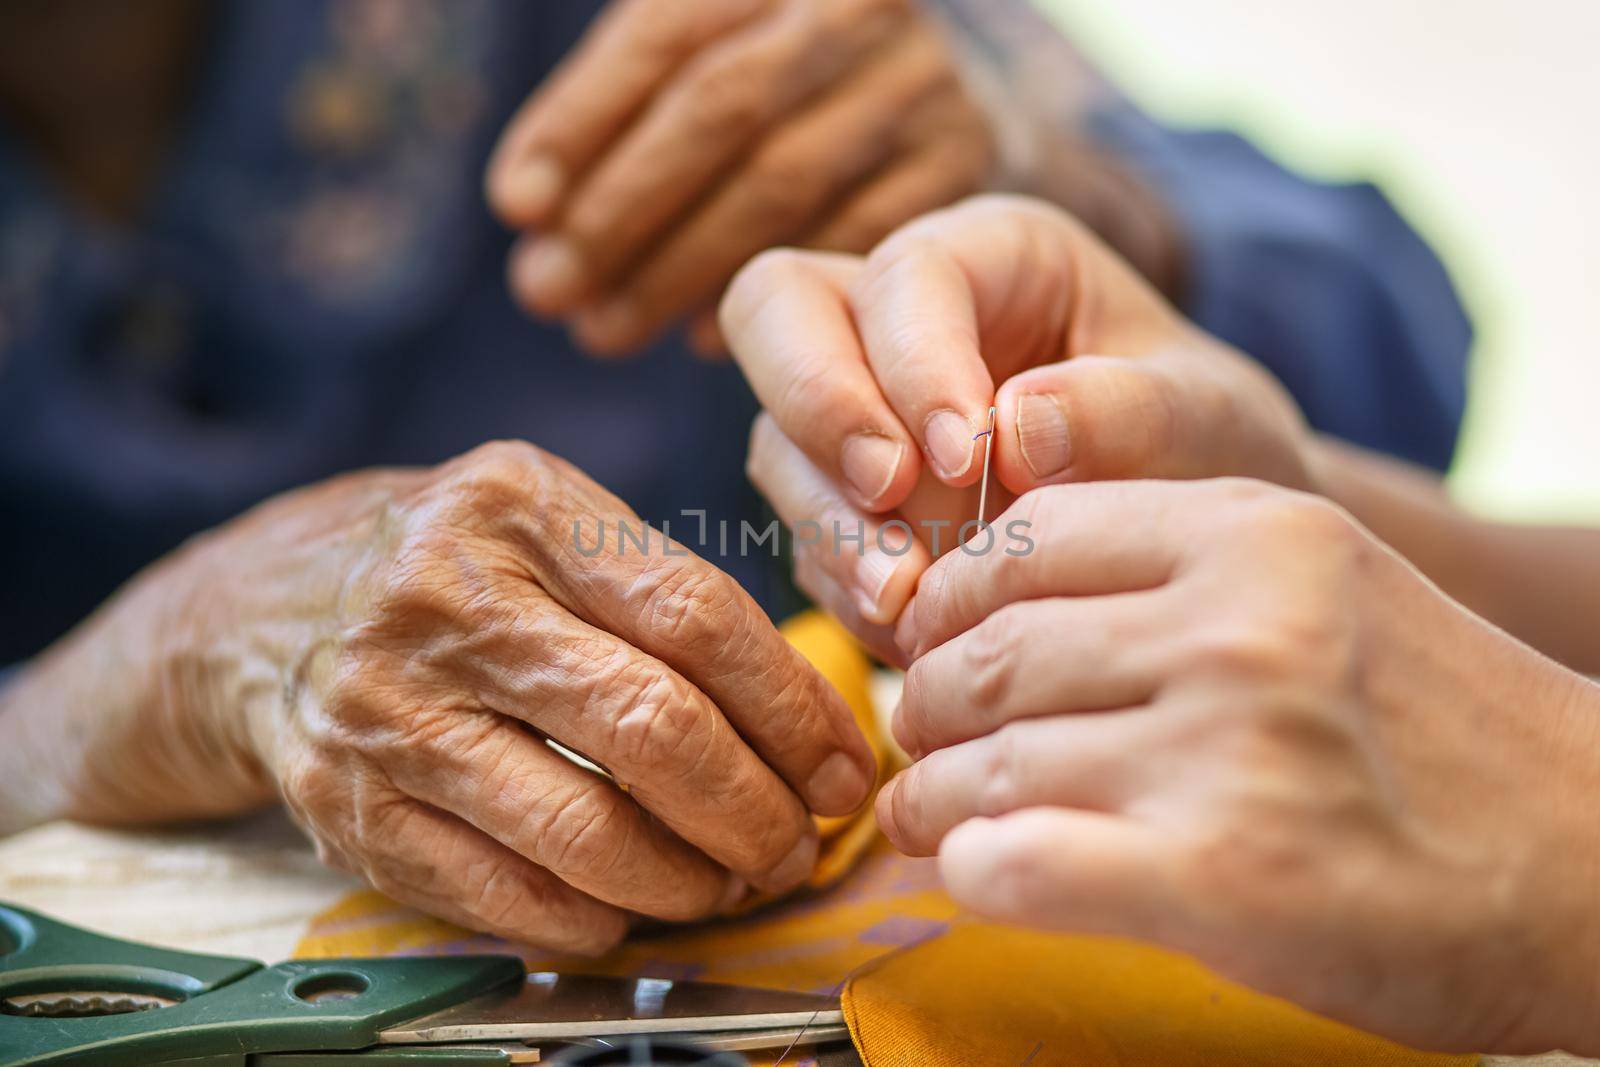 Caregiver holding thread the needle for elderly woman in the cloth crafts occupational therapy for Alzheimers or dementia by toa55